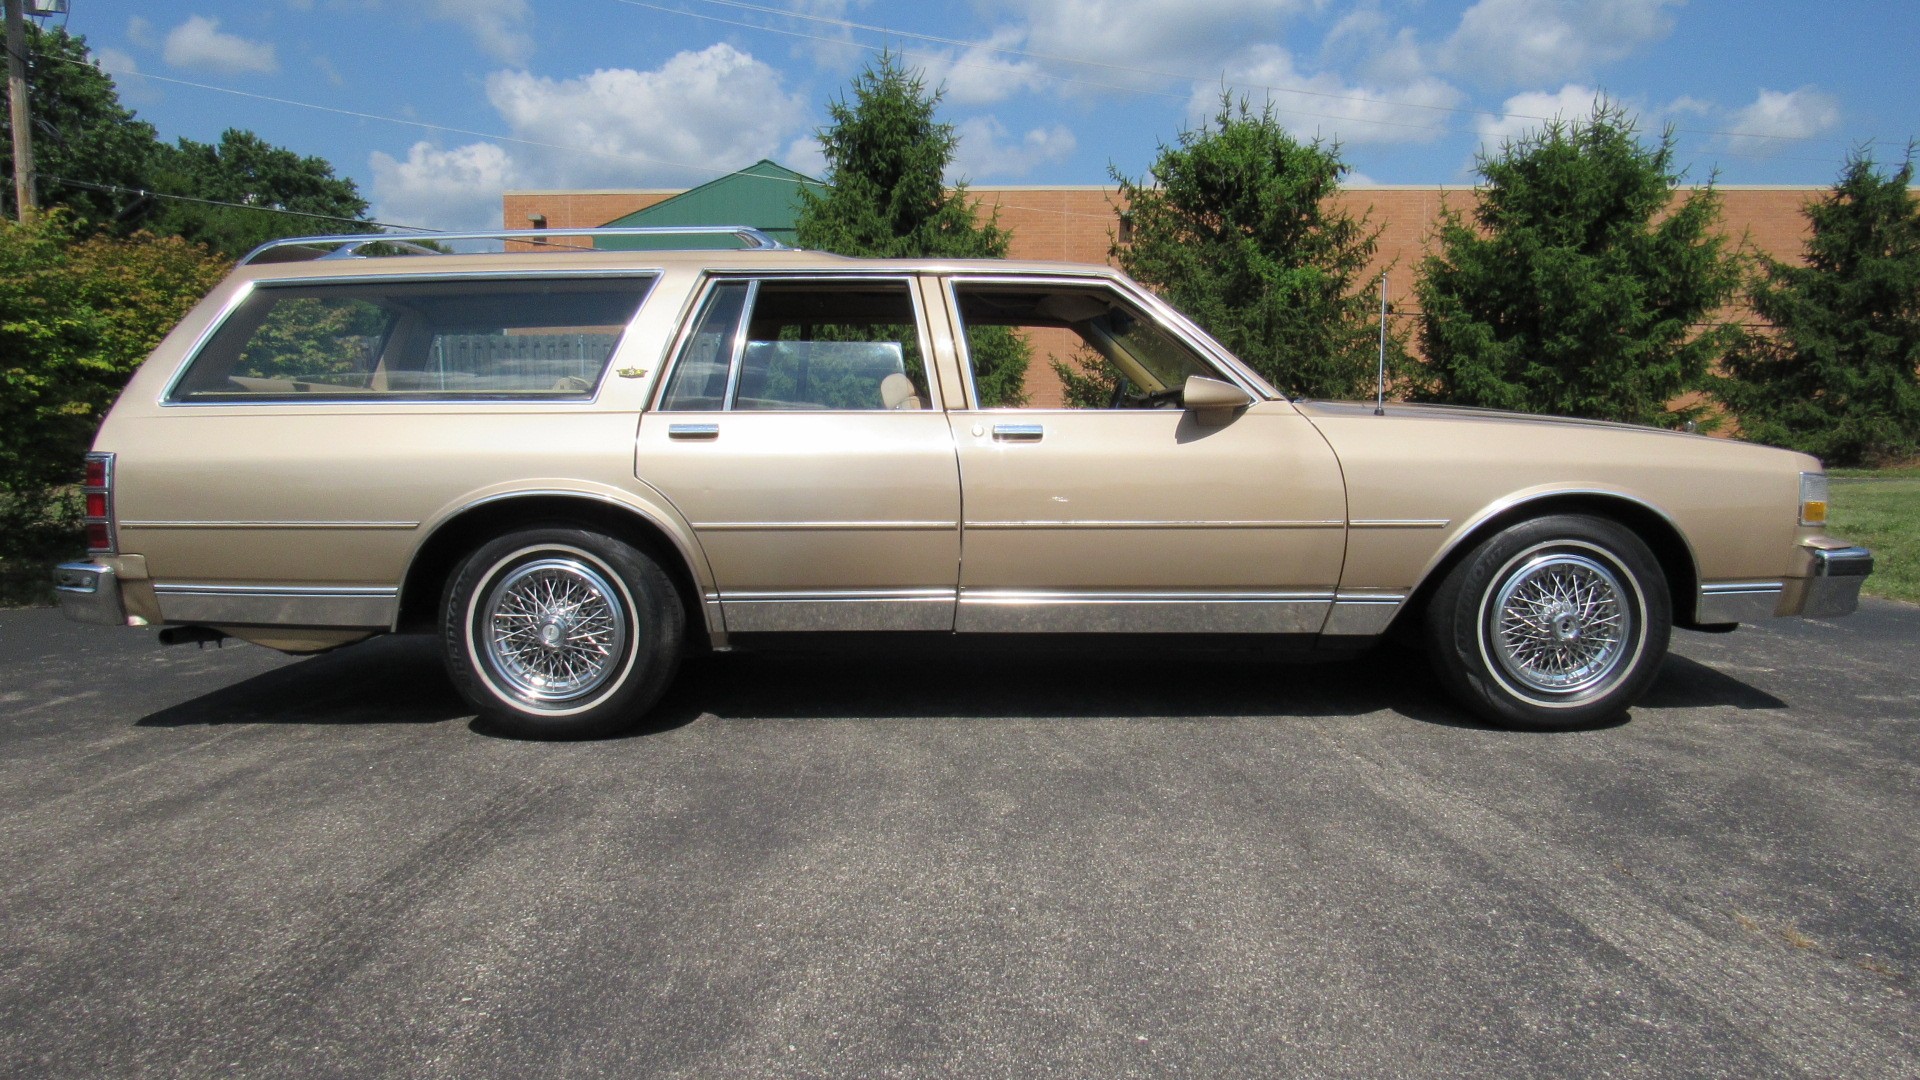 1987 Caprice Wagon, 3 Row Seating, 75K Miles, SOLD!